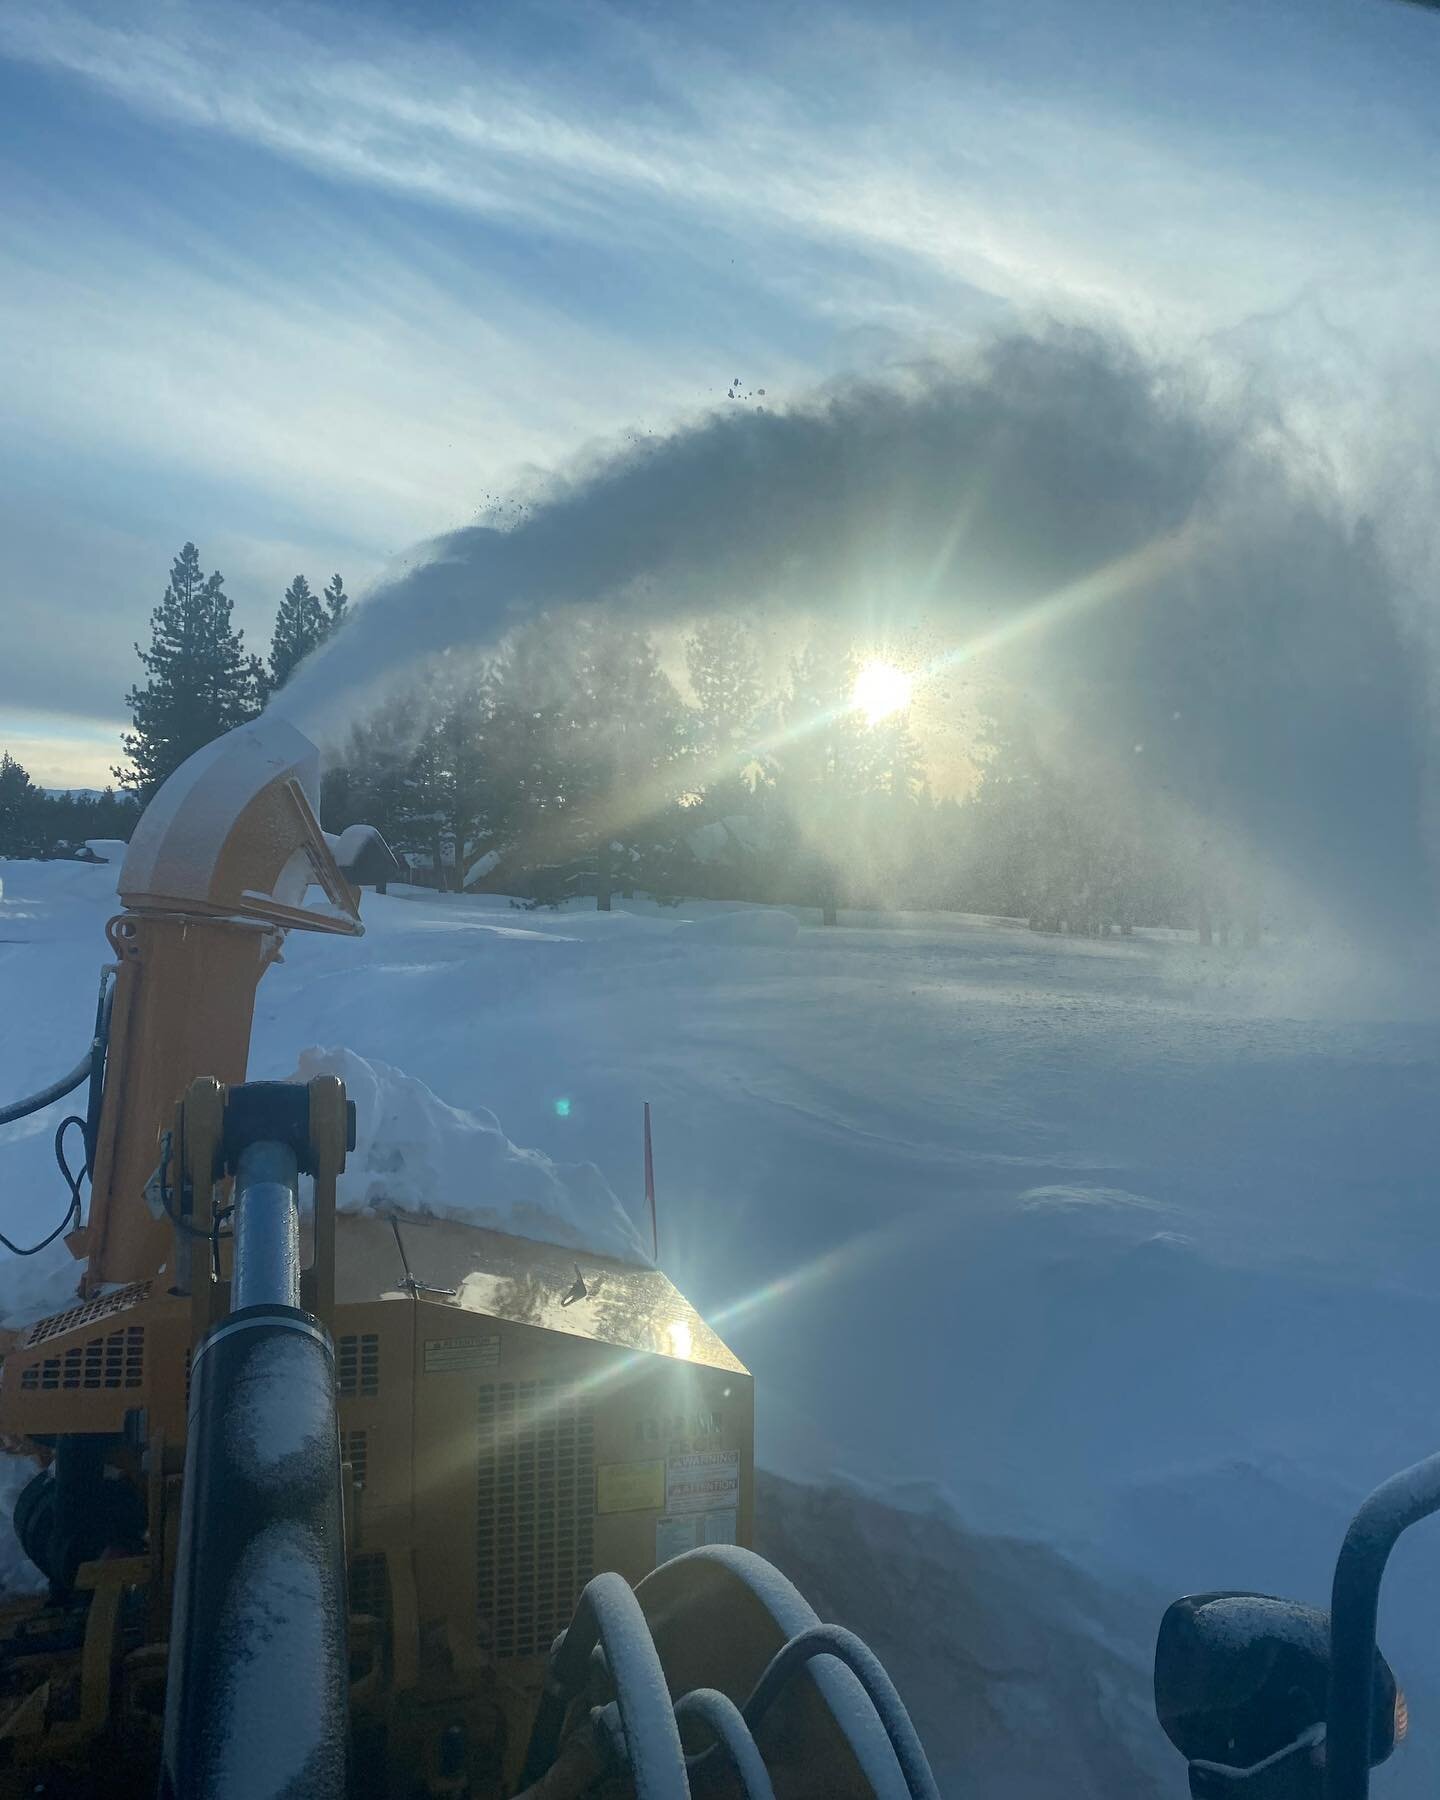 We spent the last few days helping Town of Truckee give the roads a fresh cut before the next wave of storms.